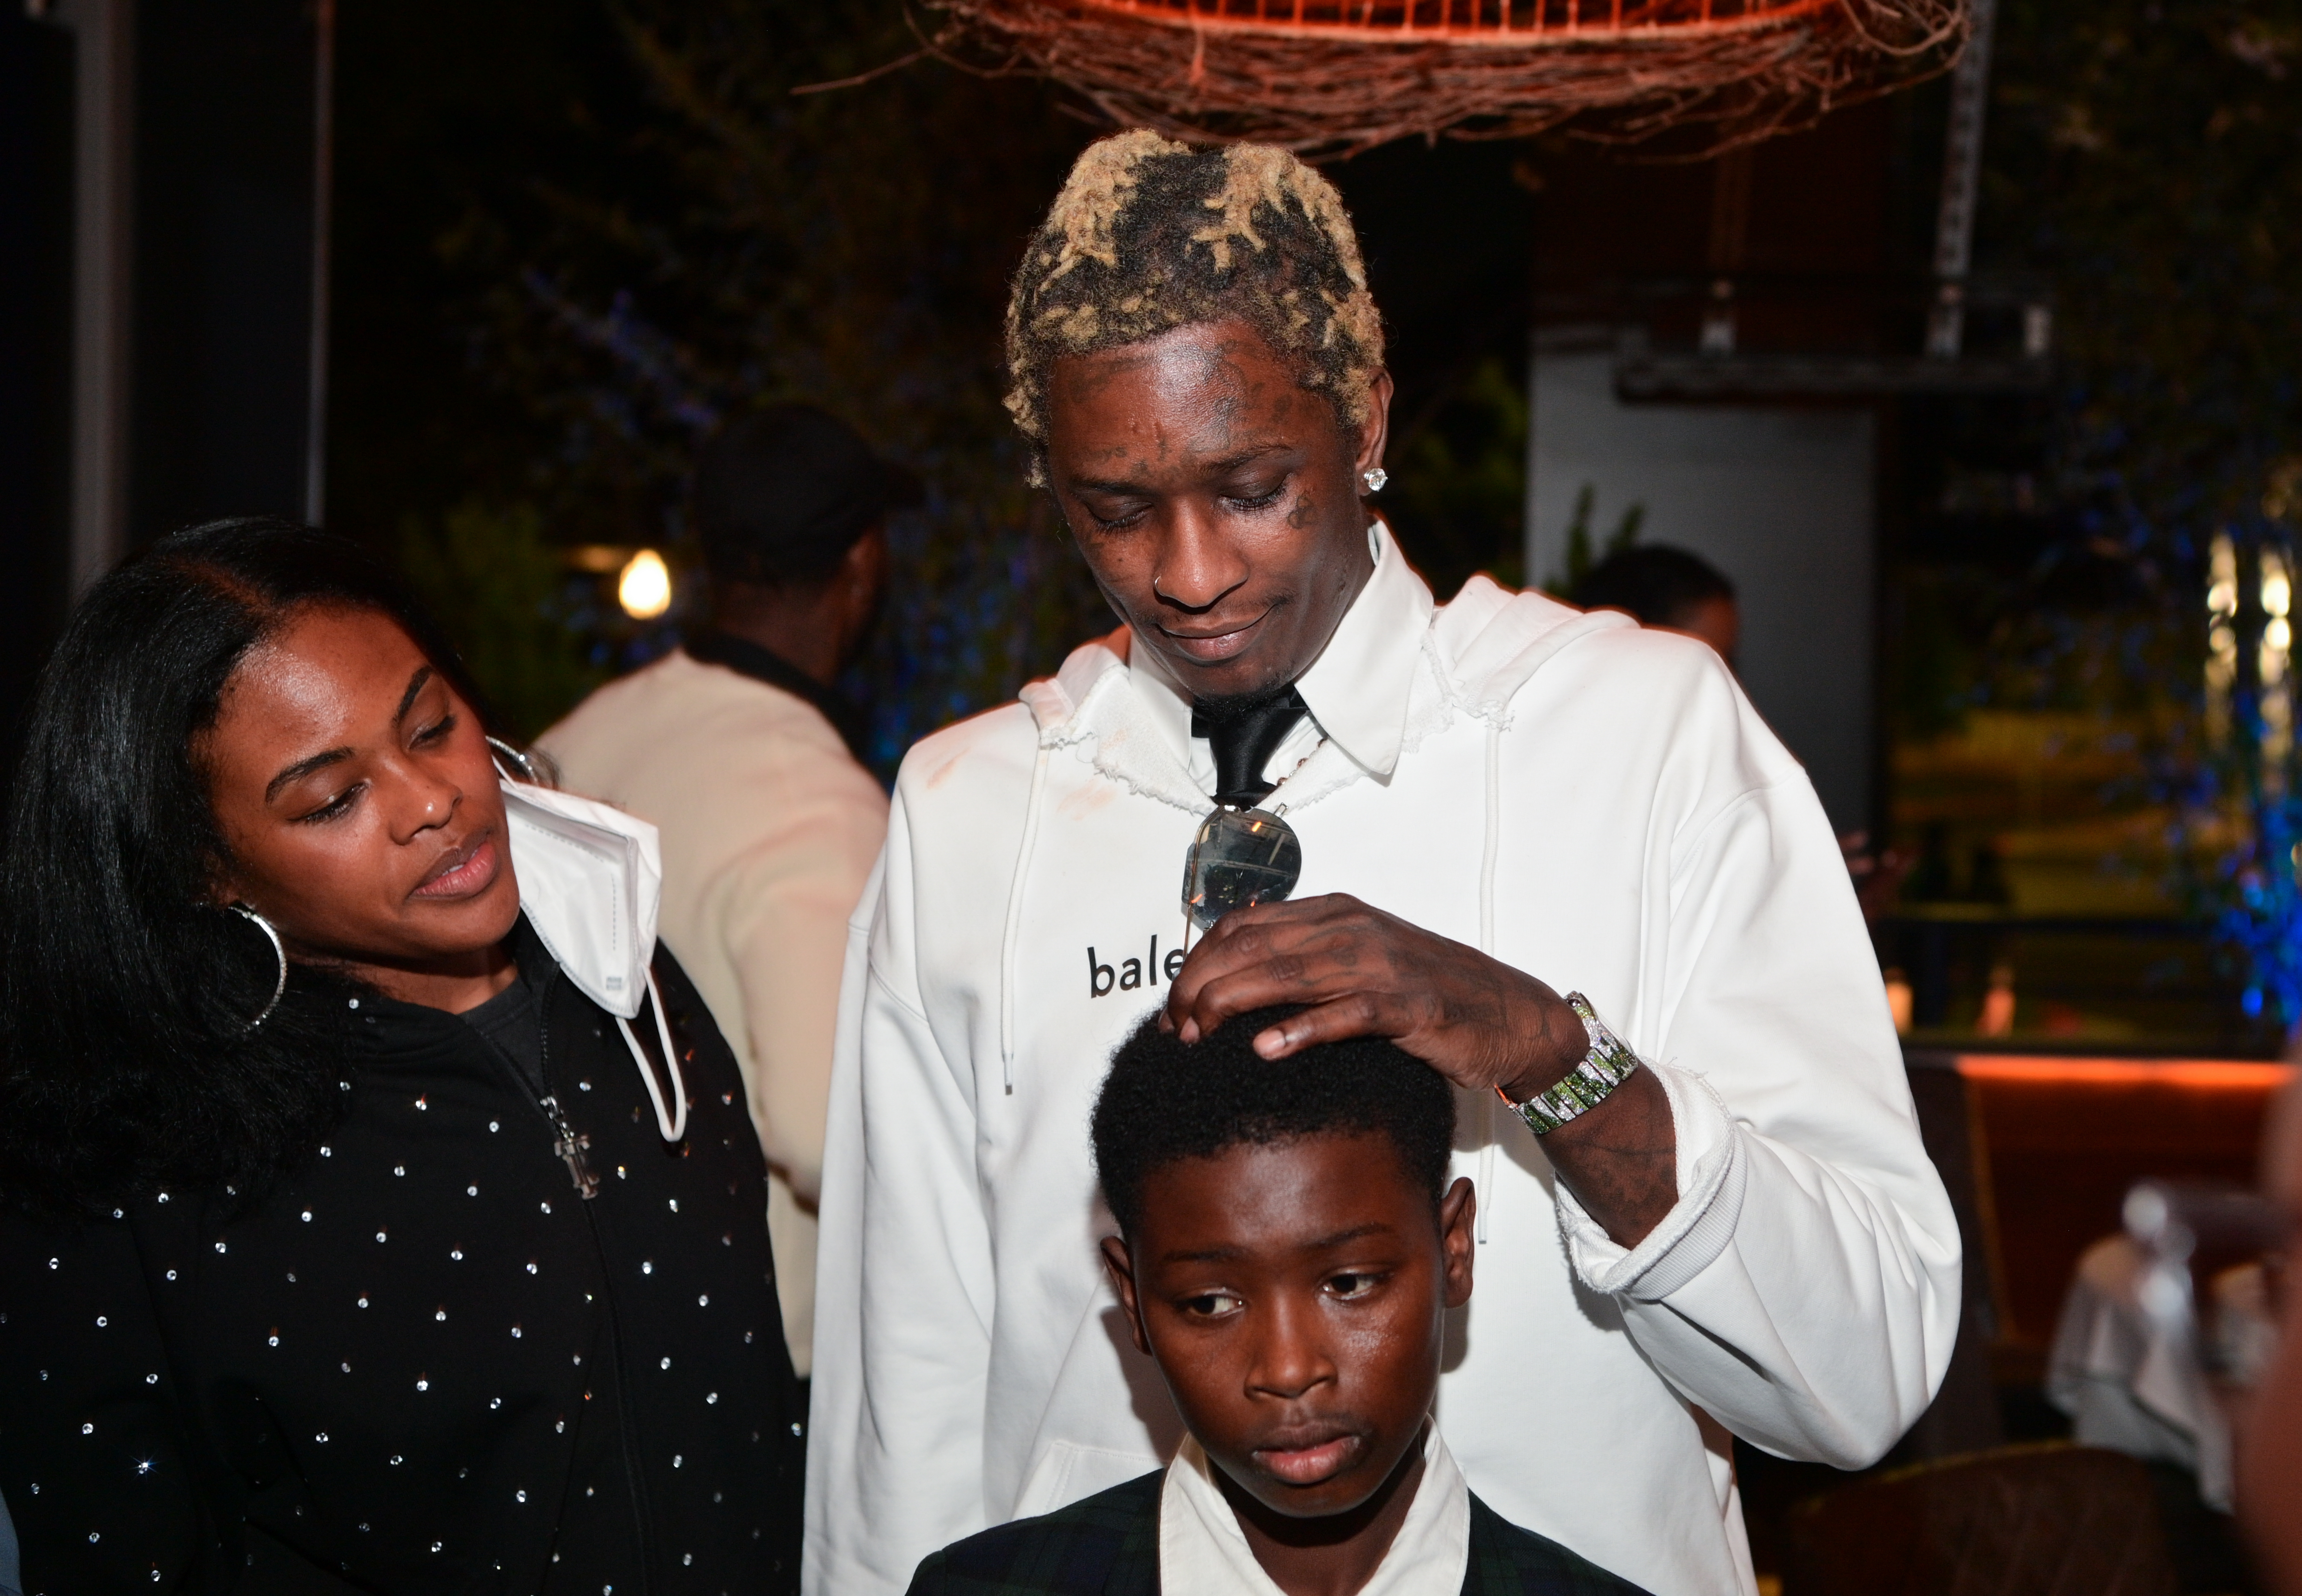 Rayna Bass, Young Thug, and his son attend Slime Language 2 #1 Album Event at Annette's Chop House on April 26, 2021, in Atlanta, Georgia. | Source: Getty Images